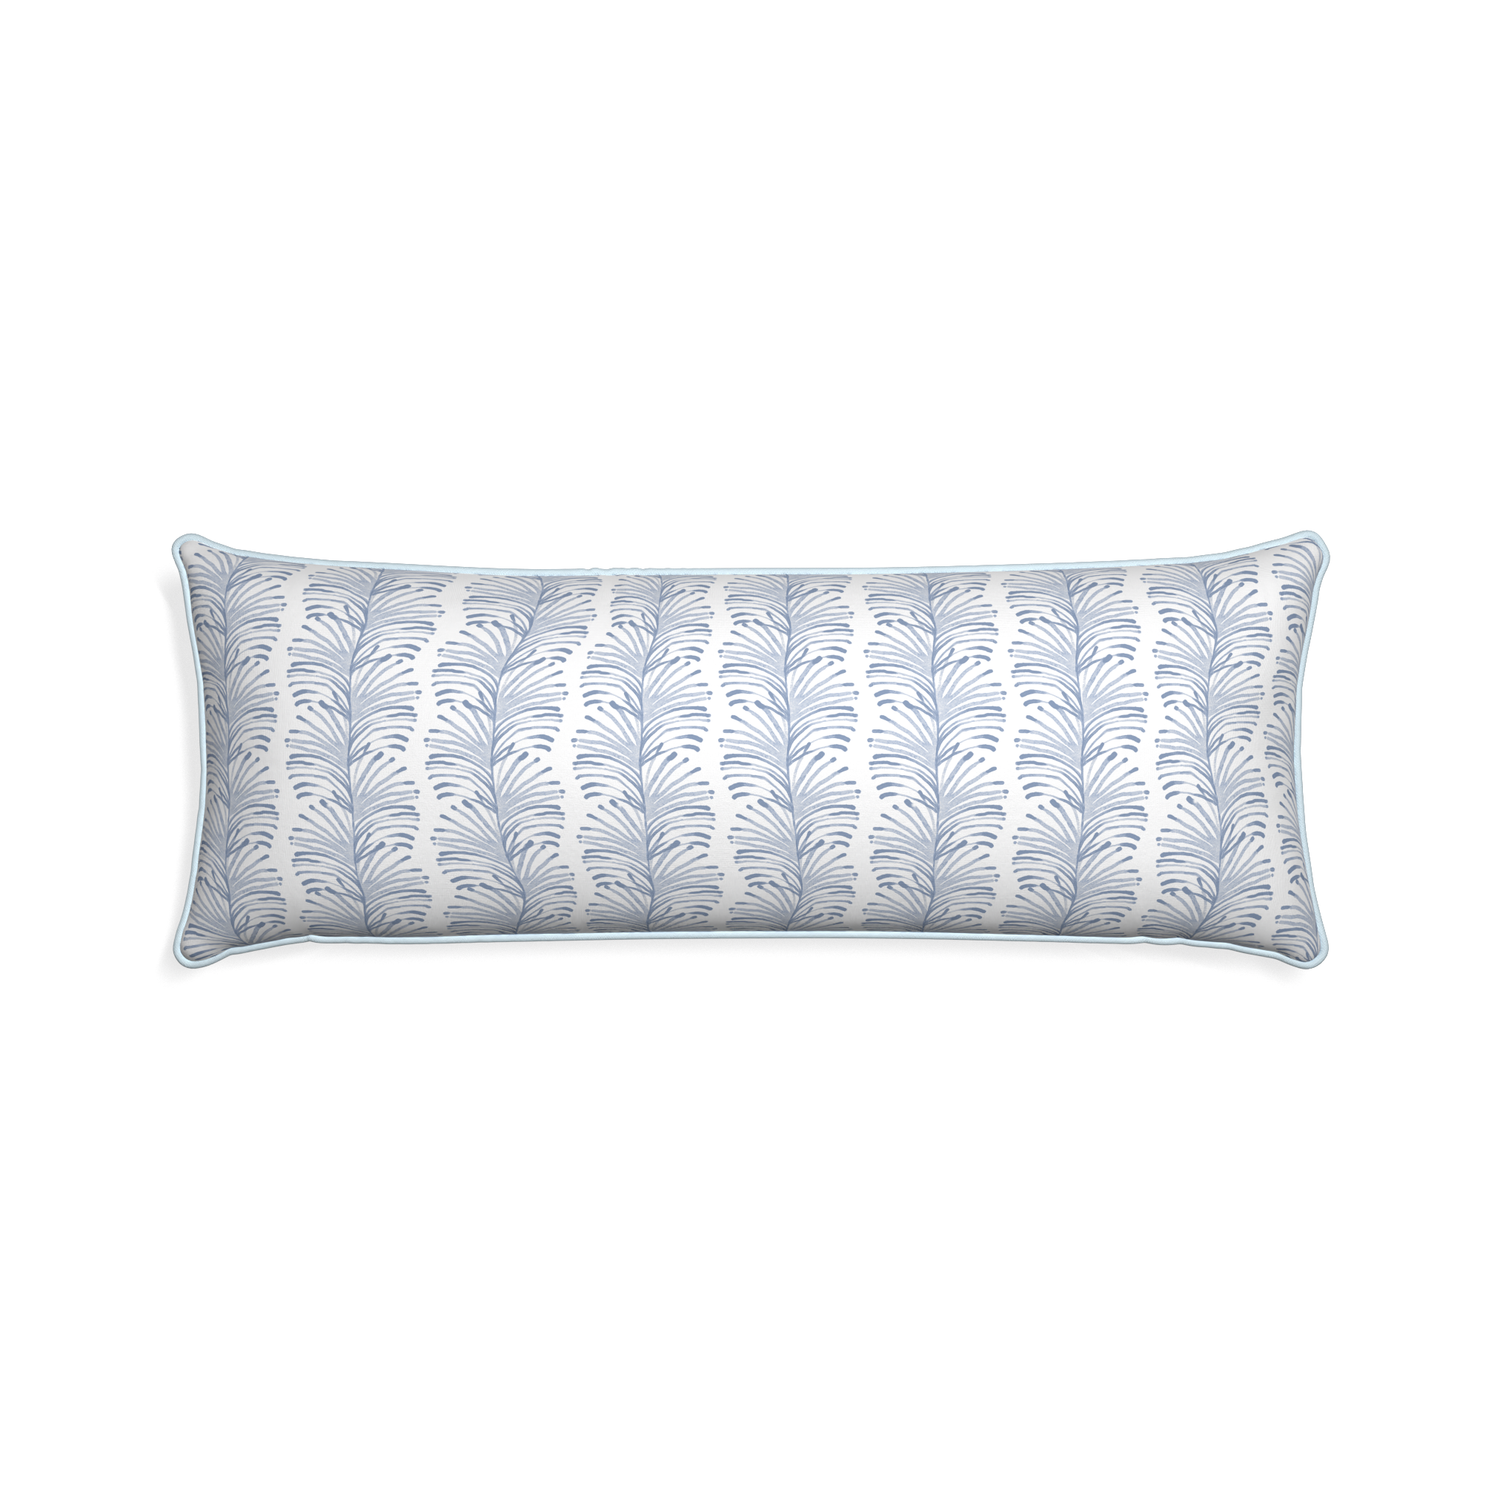 Xl-lumbar emma sky custom pillow with powder piping on white background